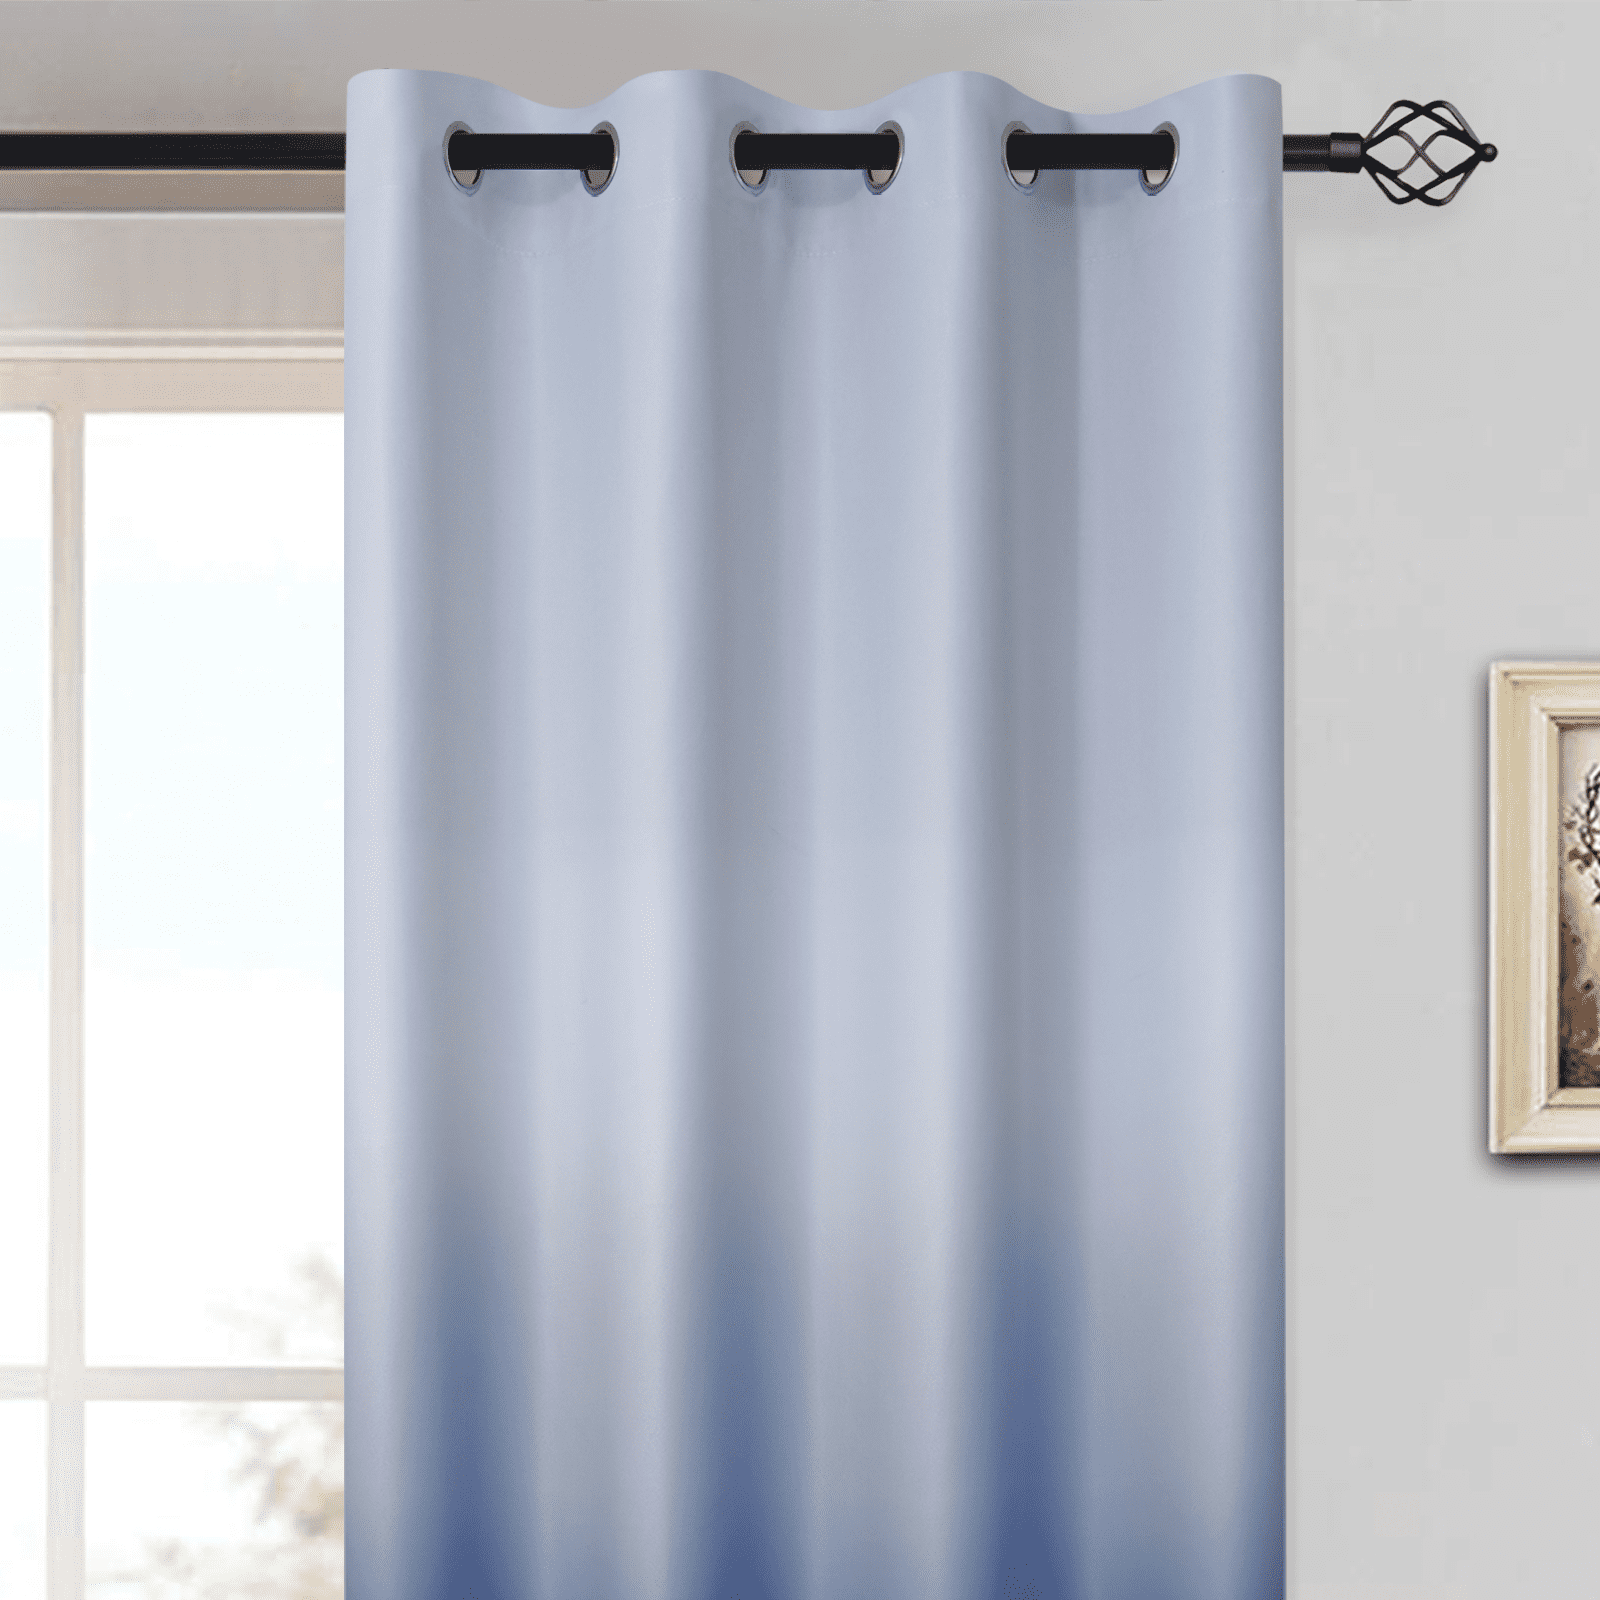 Buy Yakamok Room Darkening Black Gradient Color Ombre Blackout Curtains  Thickening Polyester Thermal Insulated Grommet Window Drapes for Living  Room/Bedroom (Black, 2 Panels, 52x84 Inch) Online at Low Prices in India 